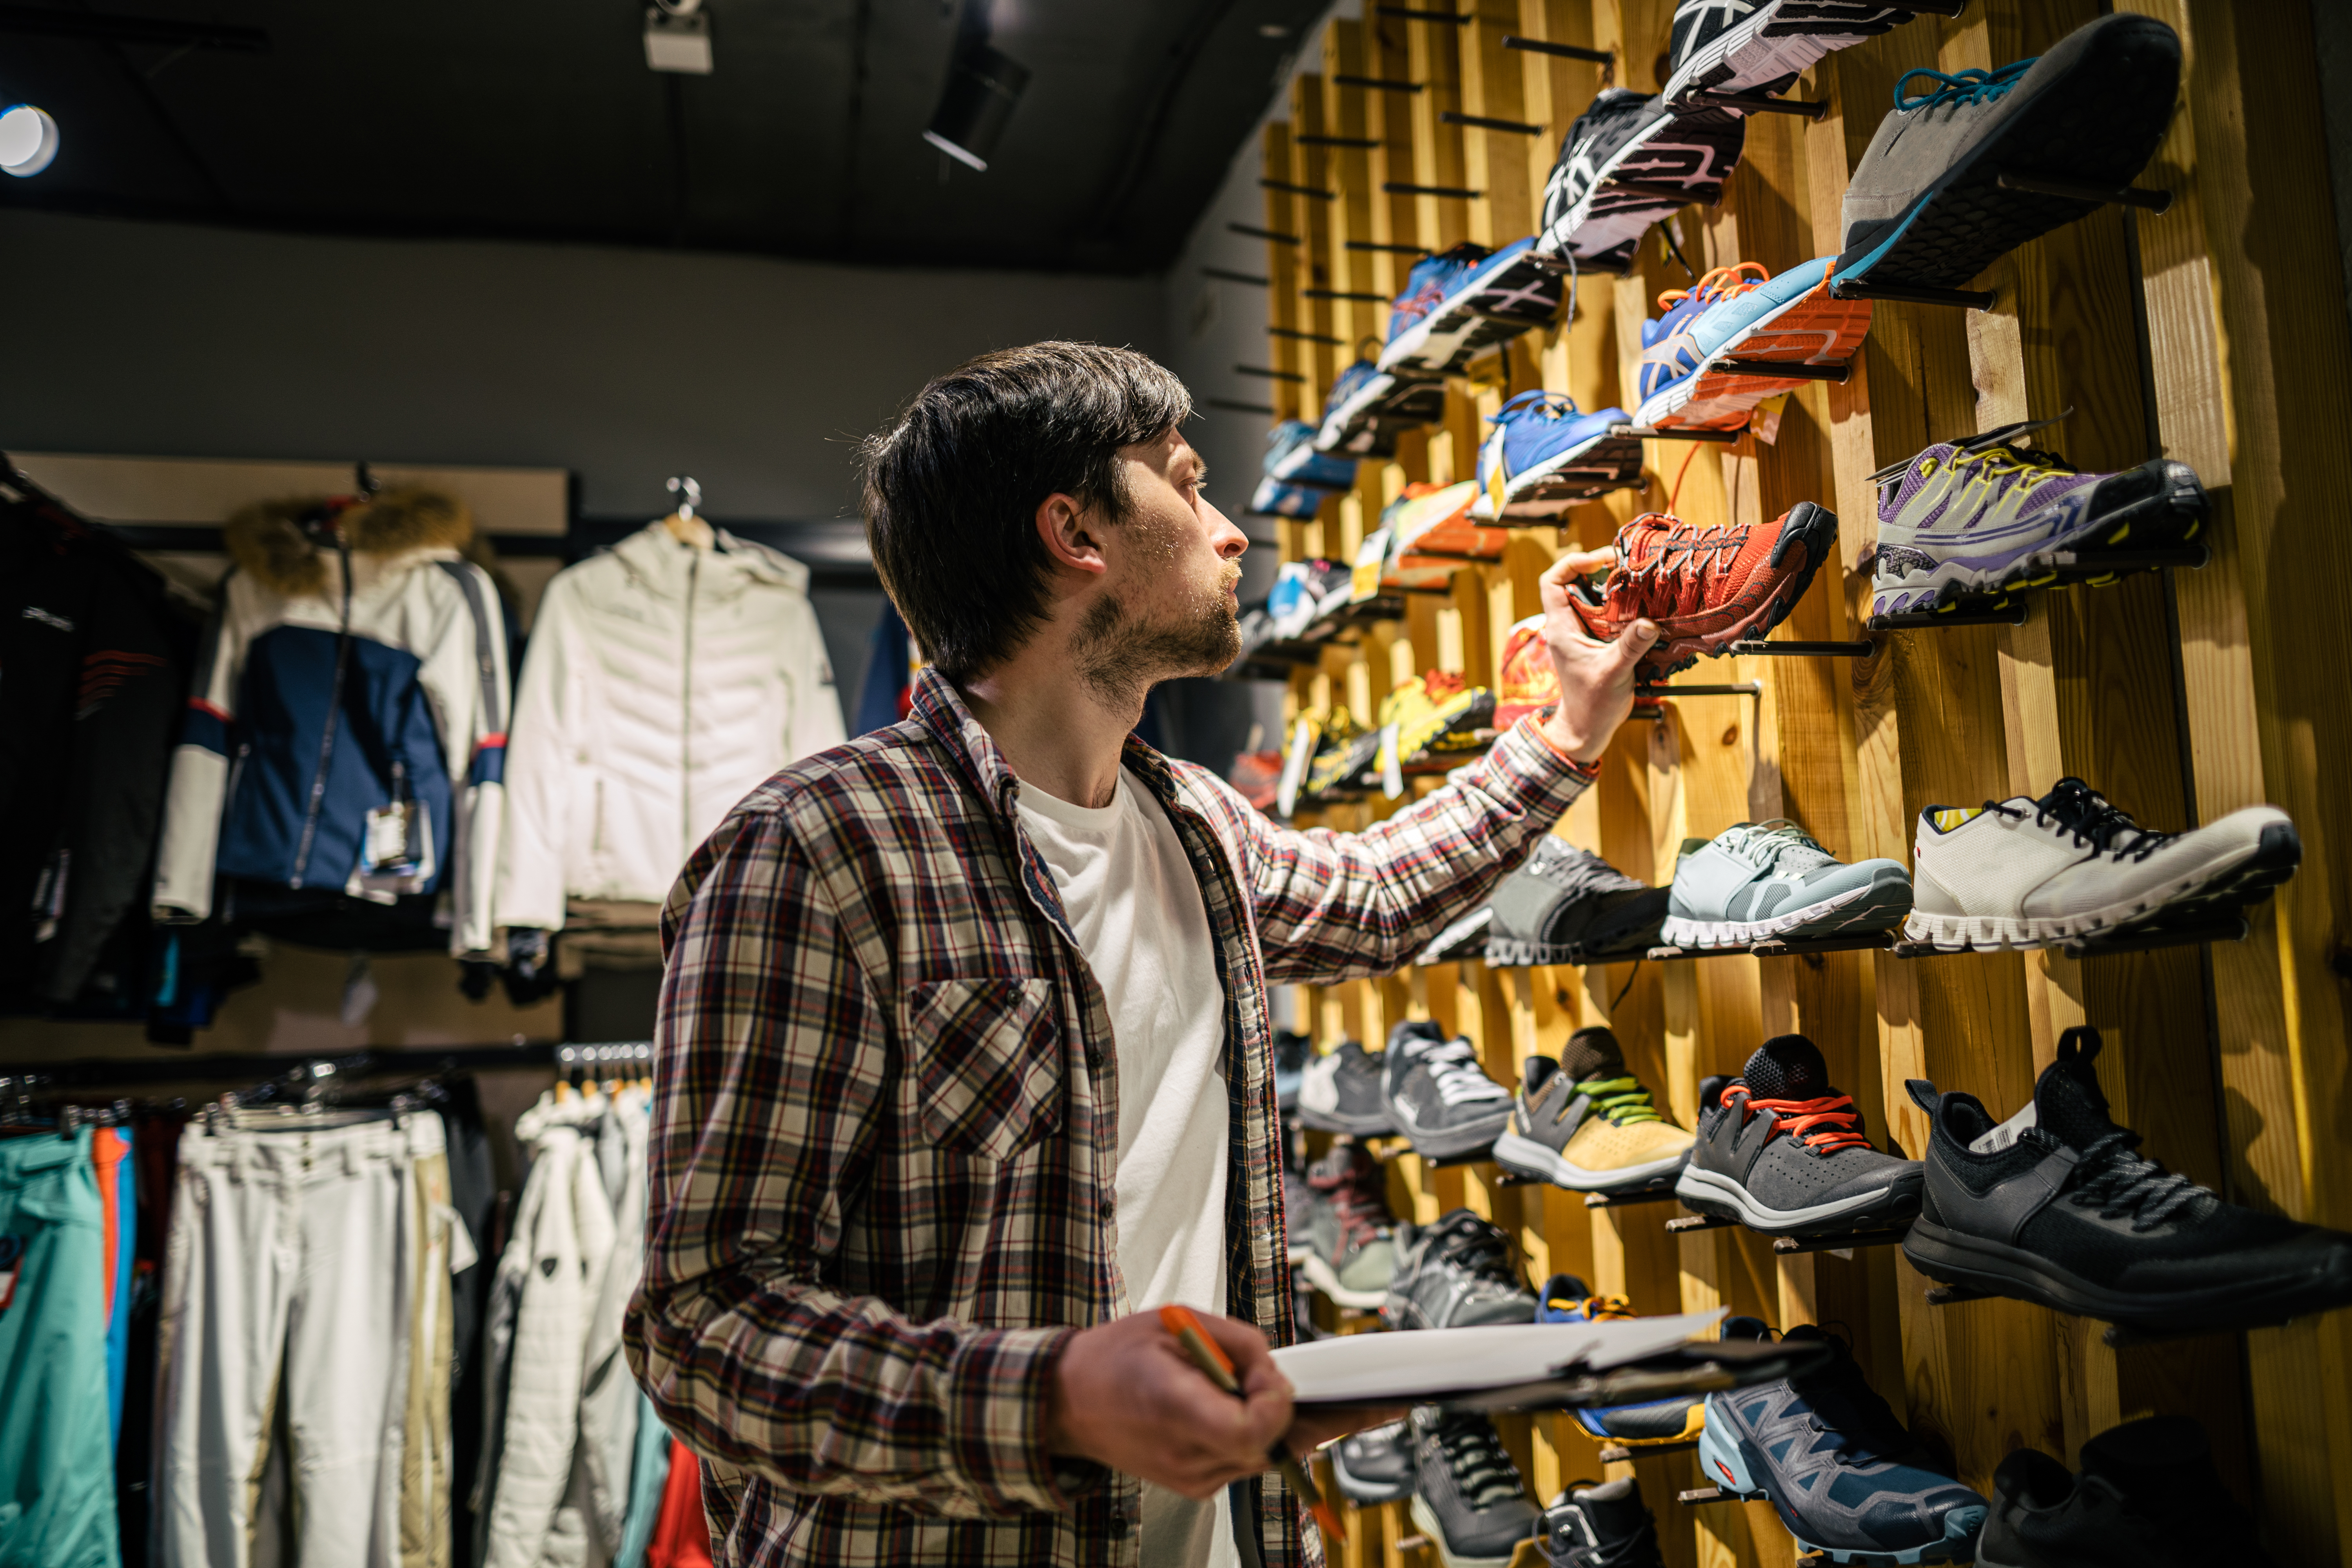 A person looks at sneakers on the wall at a store.